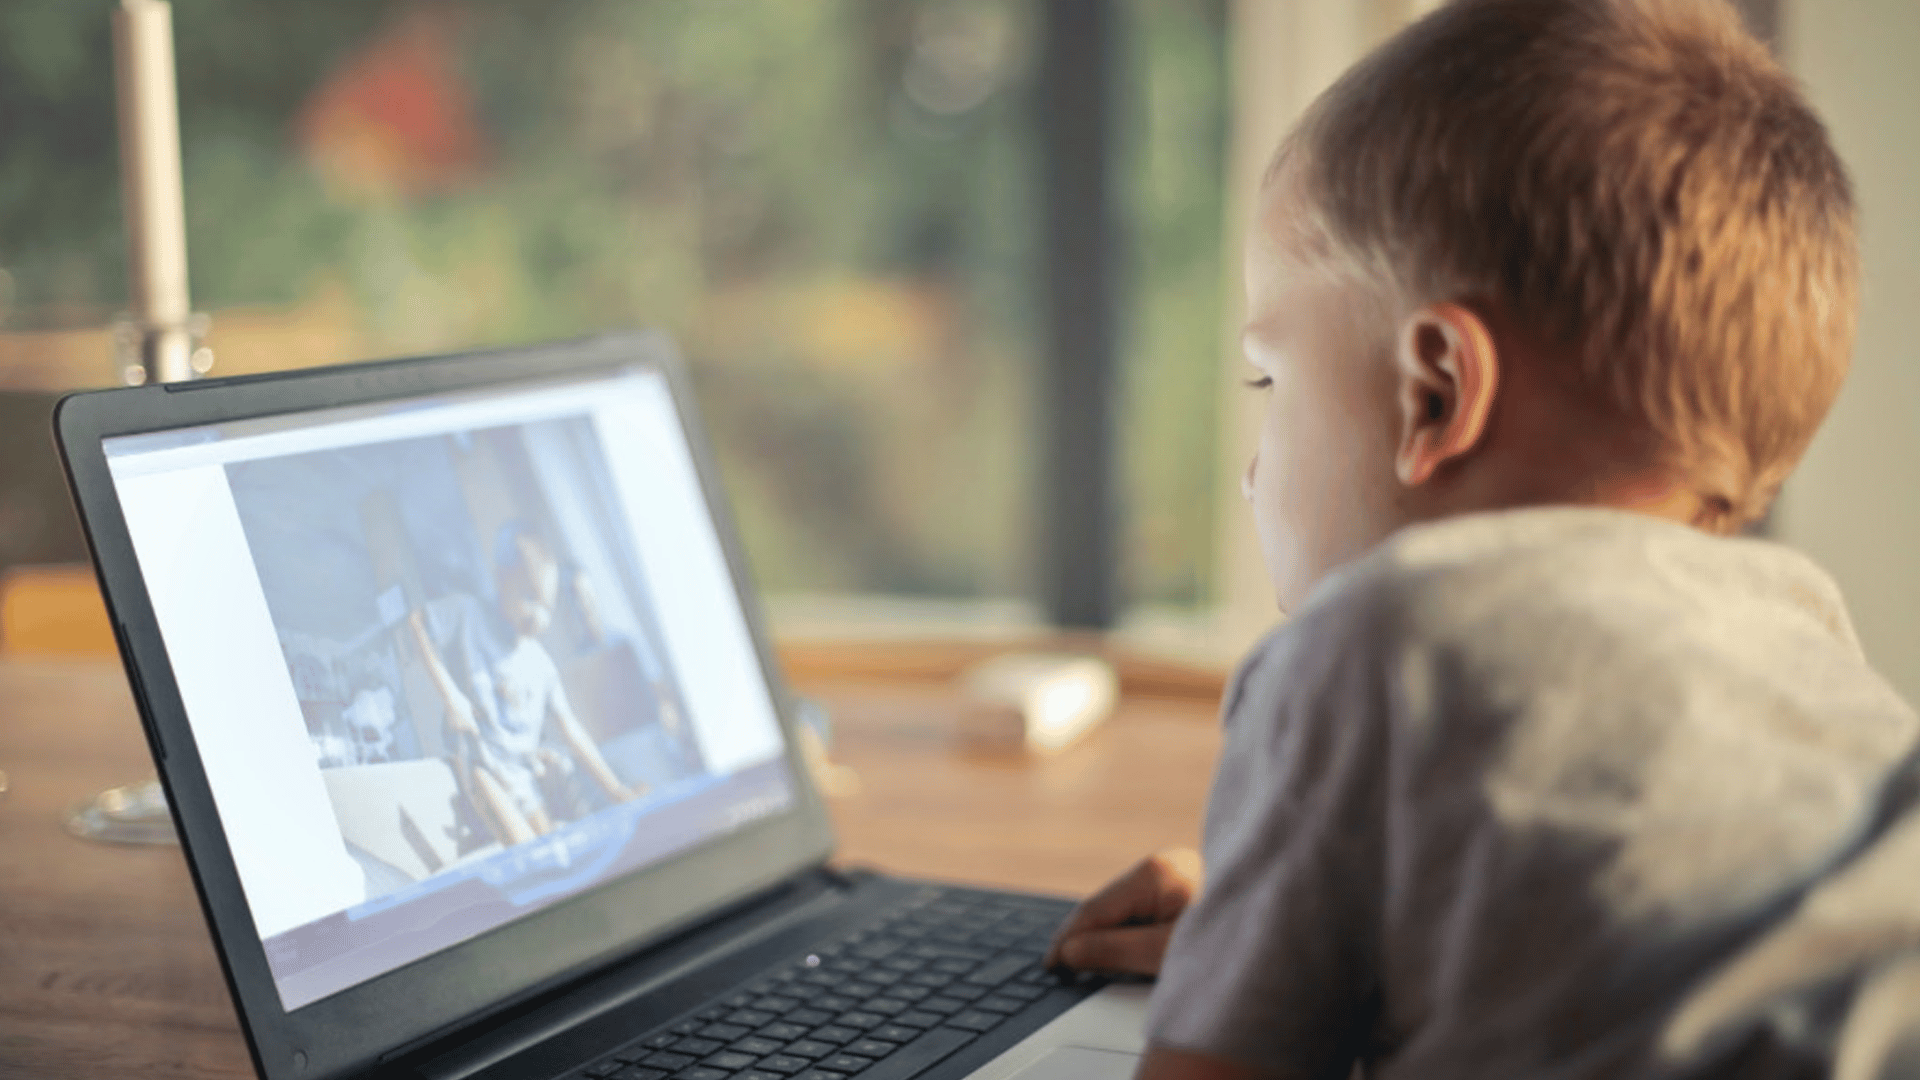 Child looking at laptop screen